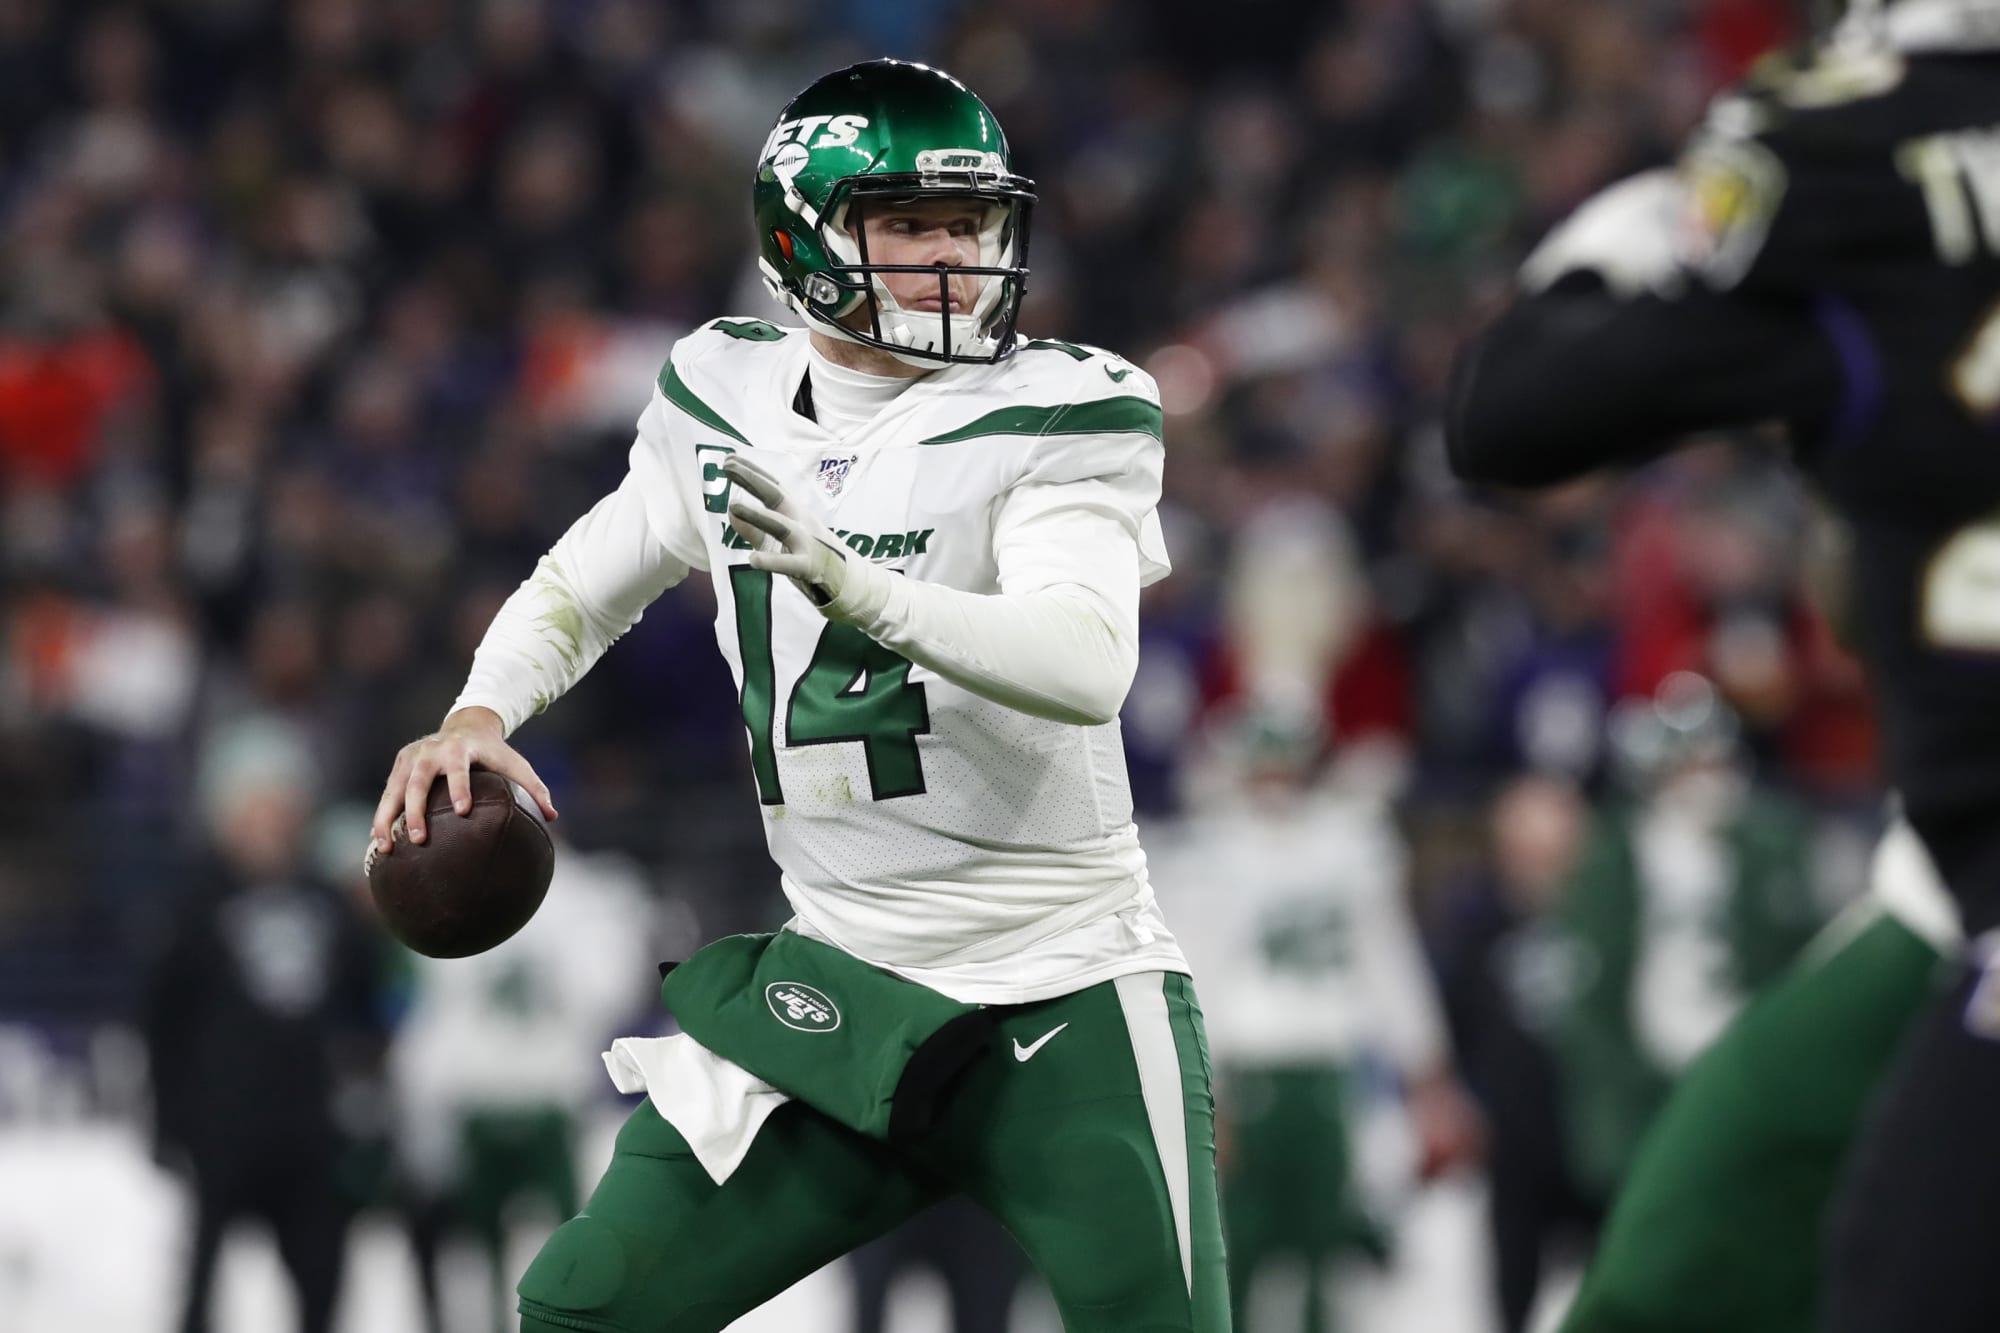 NY Jets: 4 steps the team must take this offseason